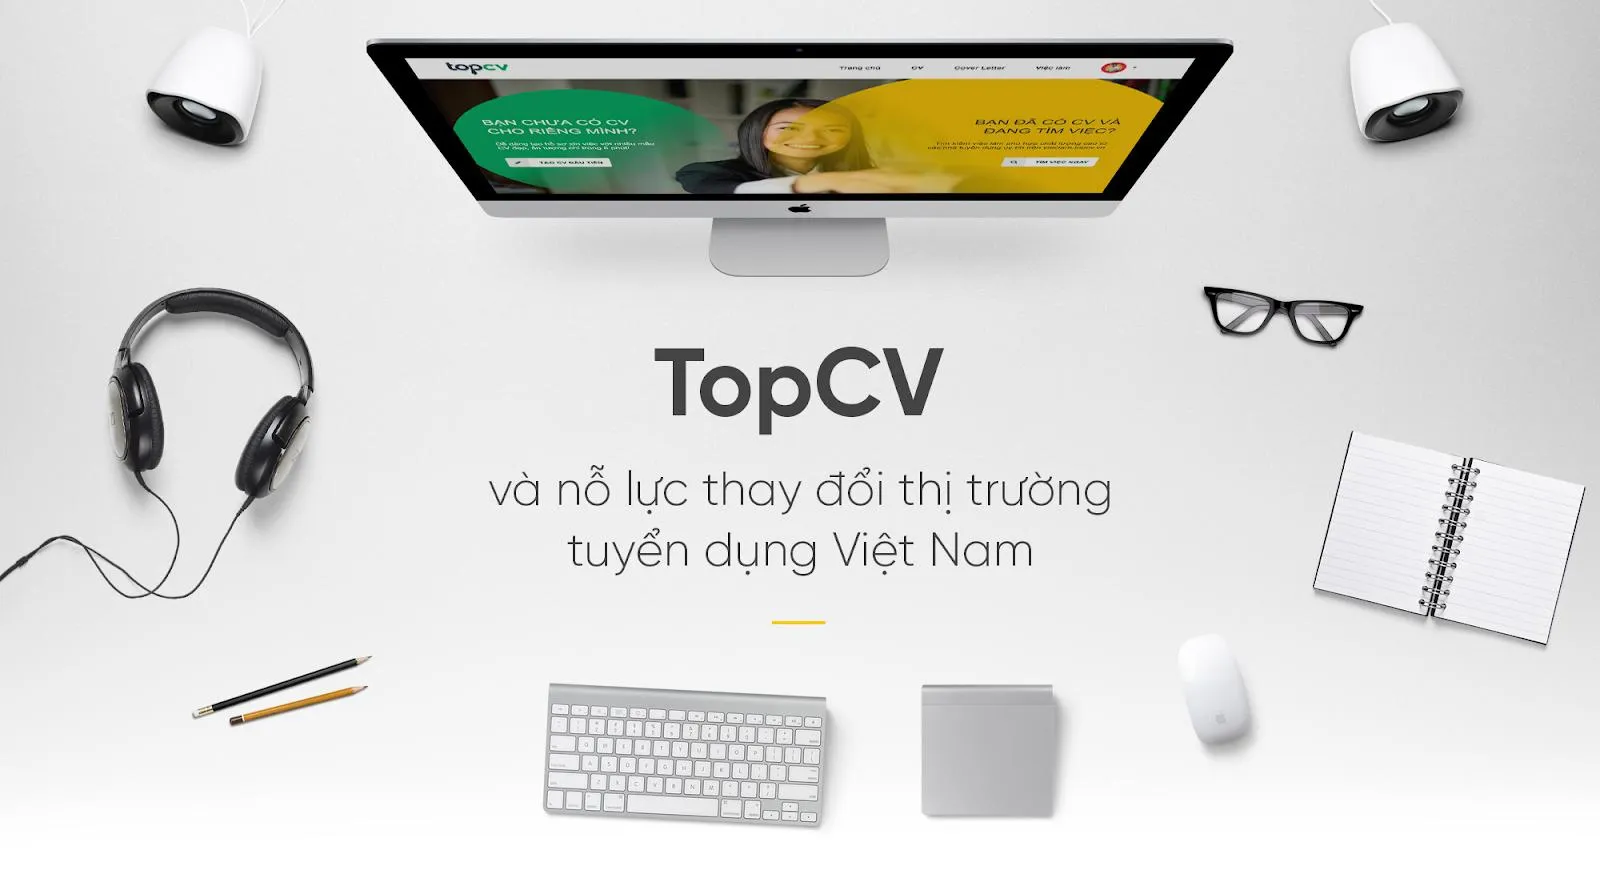 voh.com.vn.ung-dung-tim-viec-lam-anh-8